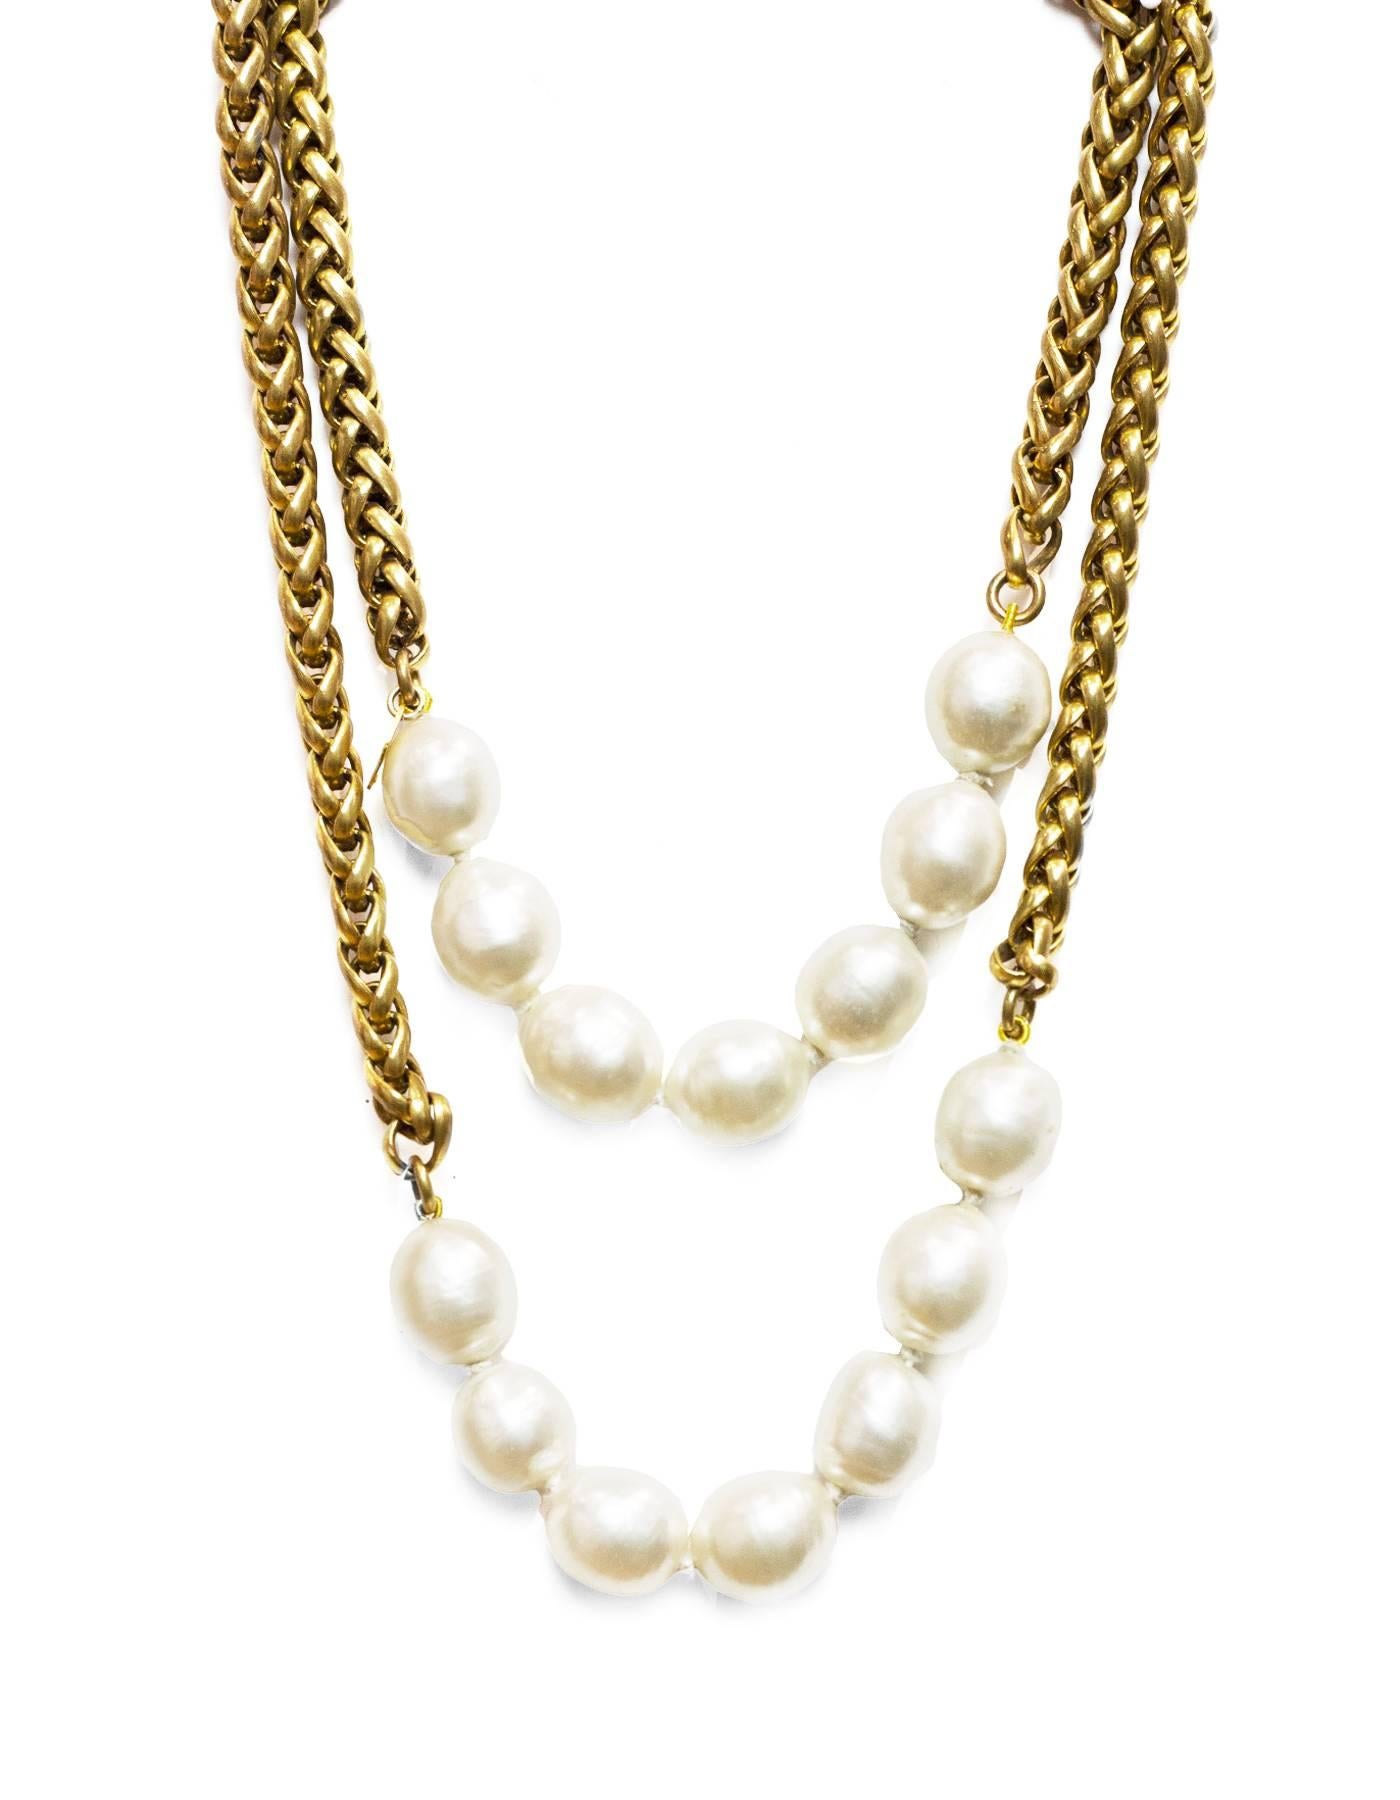 Chanel Vintage '84 Gold & Pearl Long Necklace
Note: can be worn long or doubled up (image shows doubled up)

Made In: France
Year of Production: 1984
Stamp: Chanel CC 1984
Closure: None
Color: Goldtone and ivory
Materials: Metal and faux